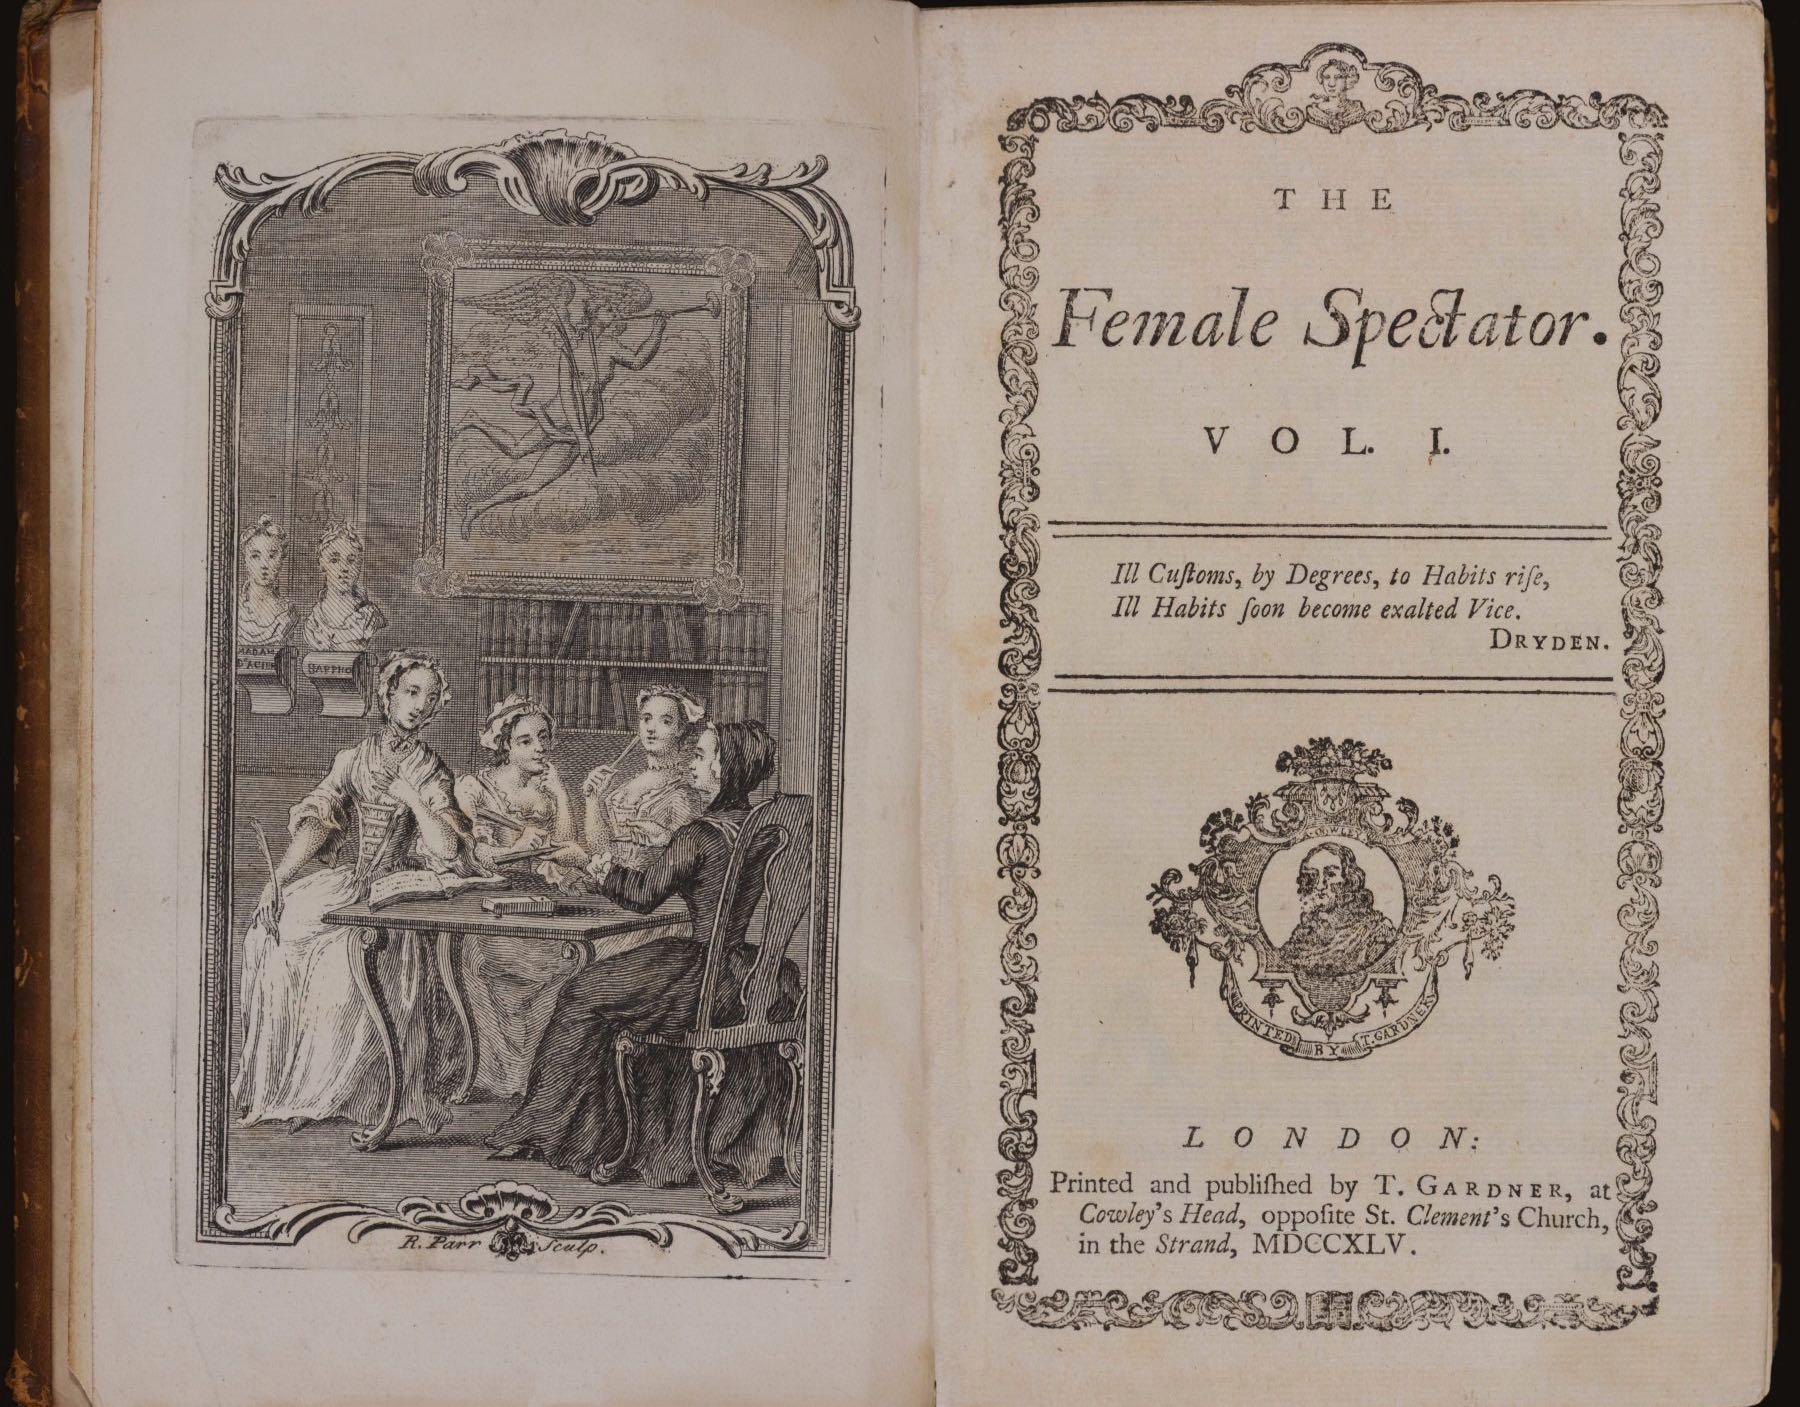 A copy of "The Female Spectator," the "Lady Whistledown" of its day. (Courtesy of the Newberry Library)